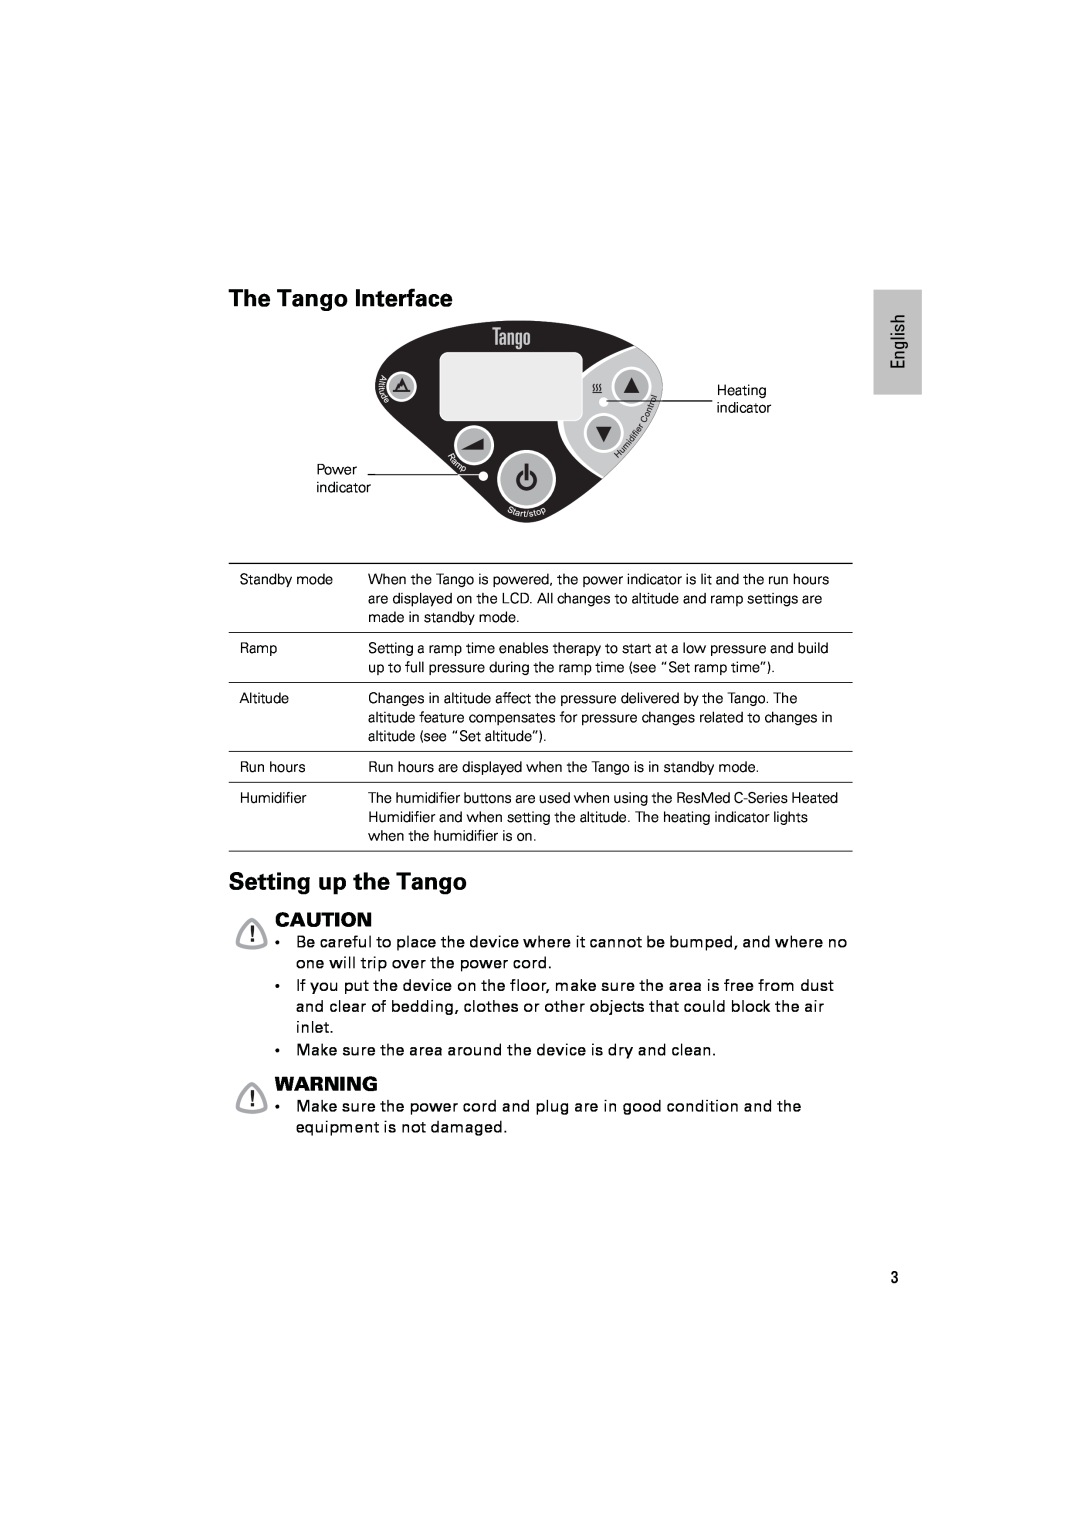 ResMed C-Series manual The Tango Interface, Setting up the Tango, English 